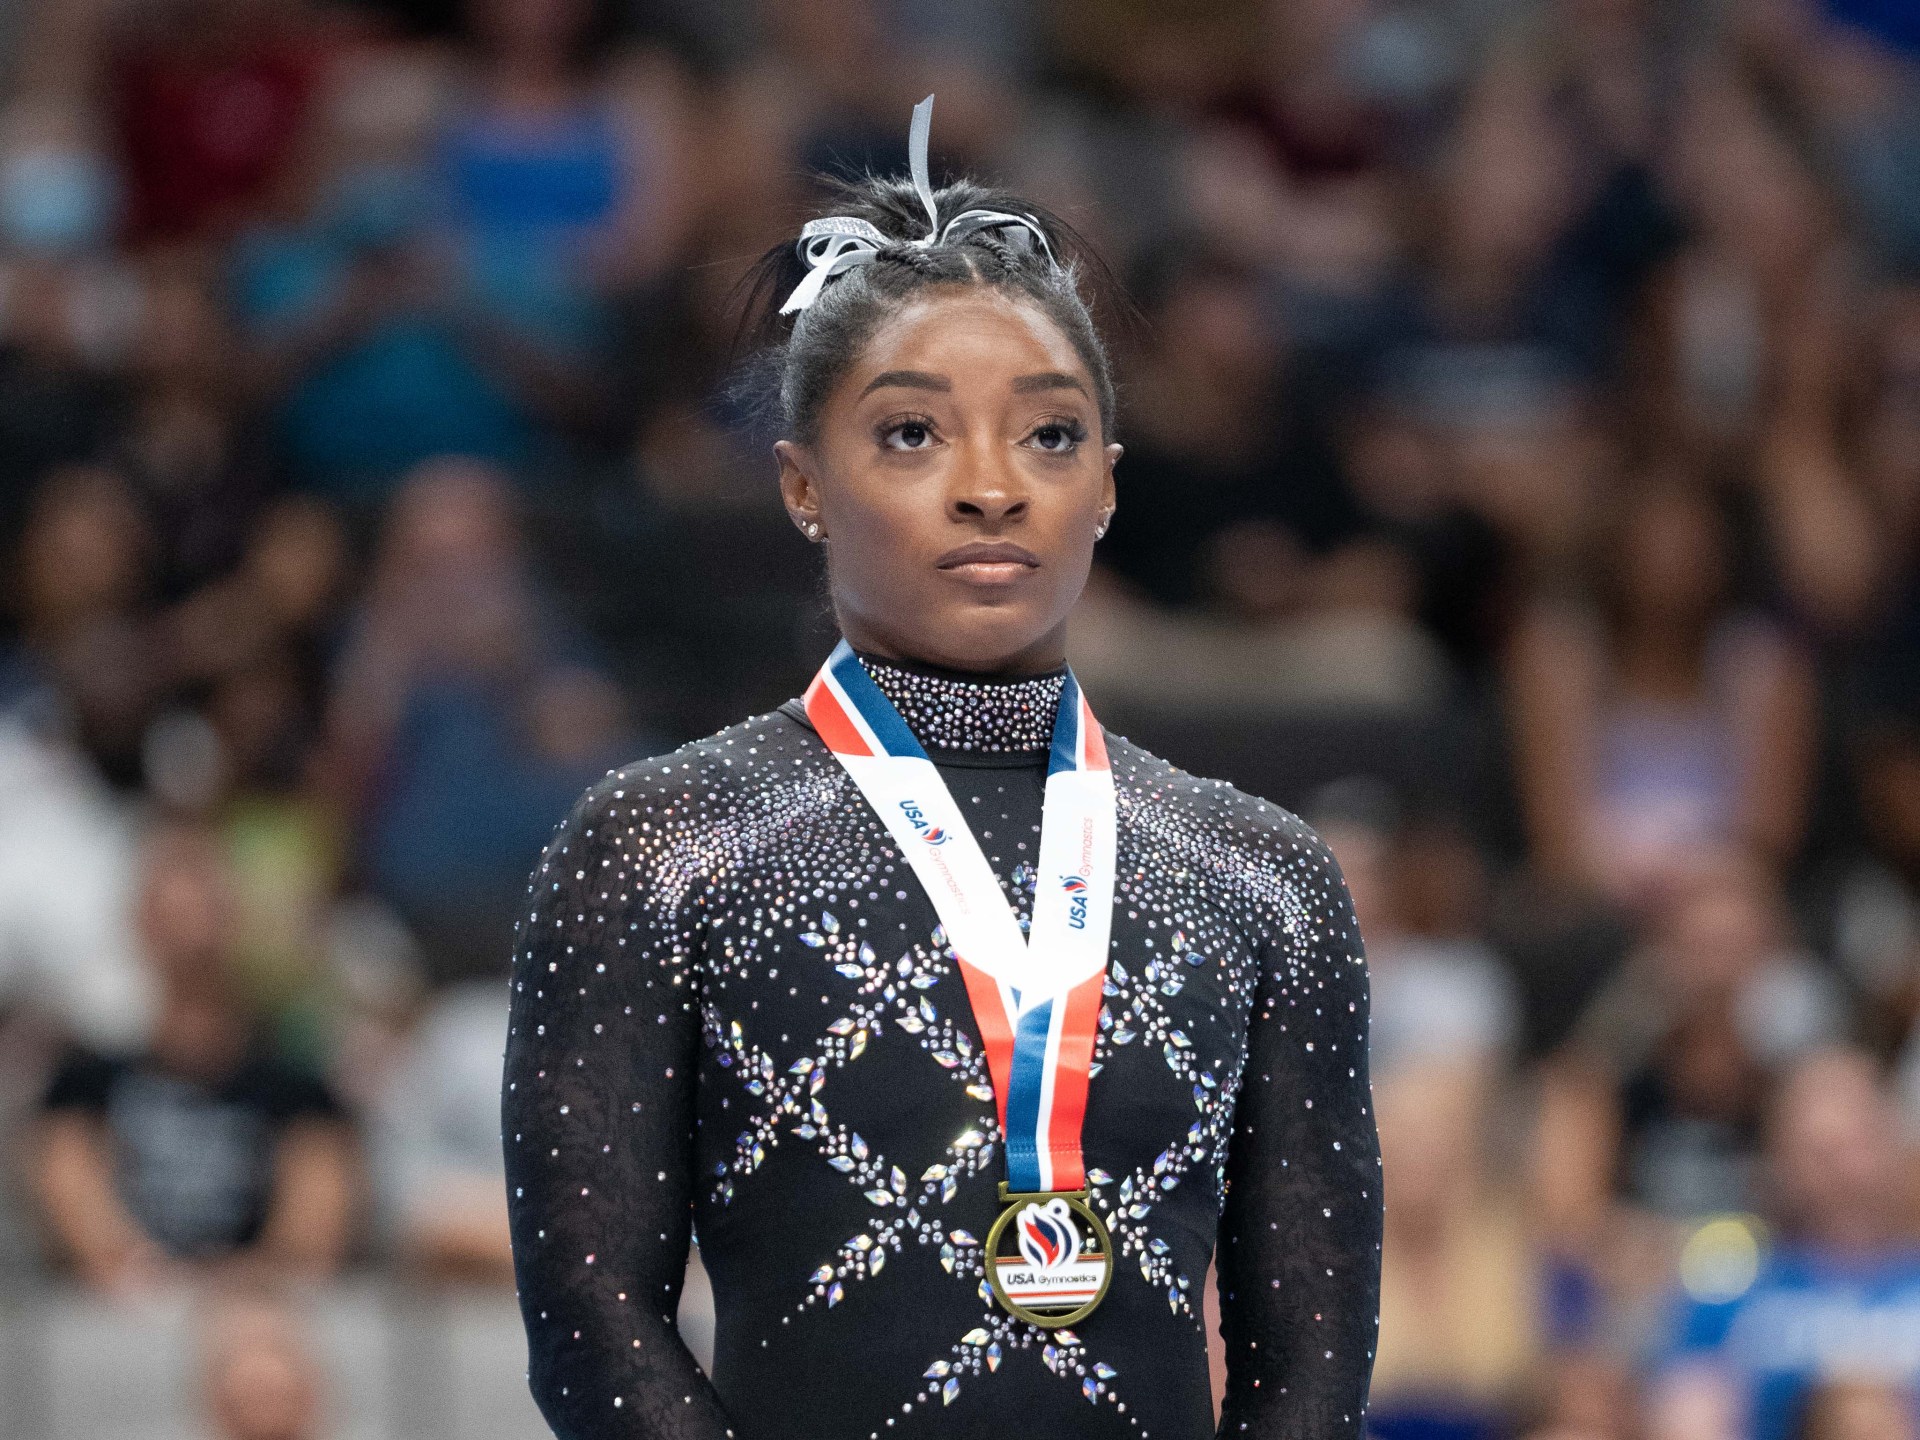 Gymnastics Ireland ‘deeply sorry’ for black girl ignored during medal ceremony |  Racism news